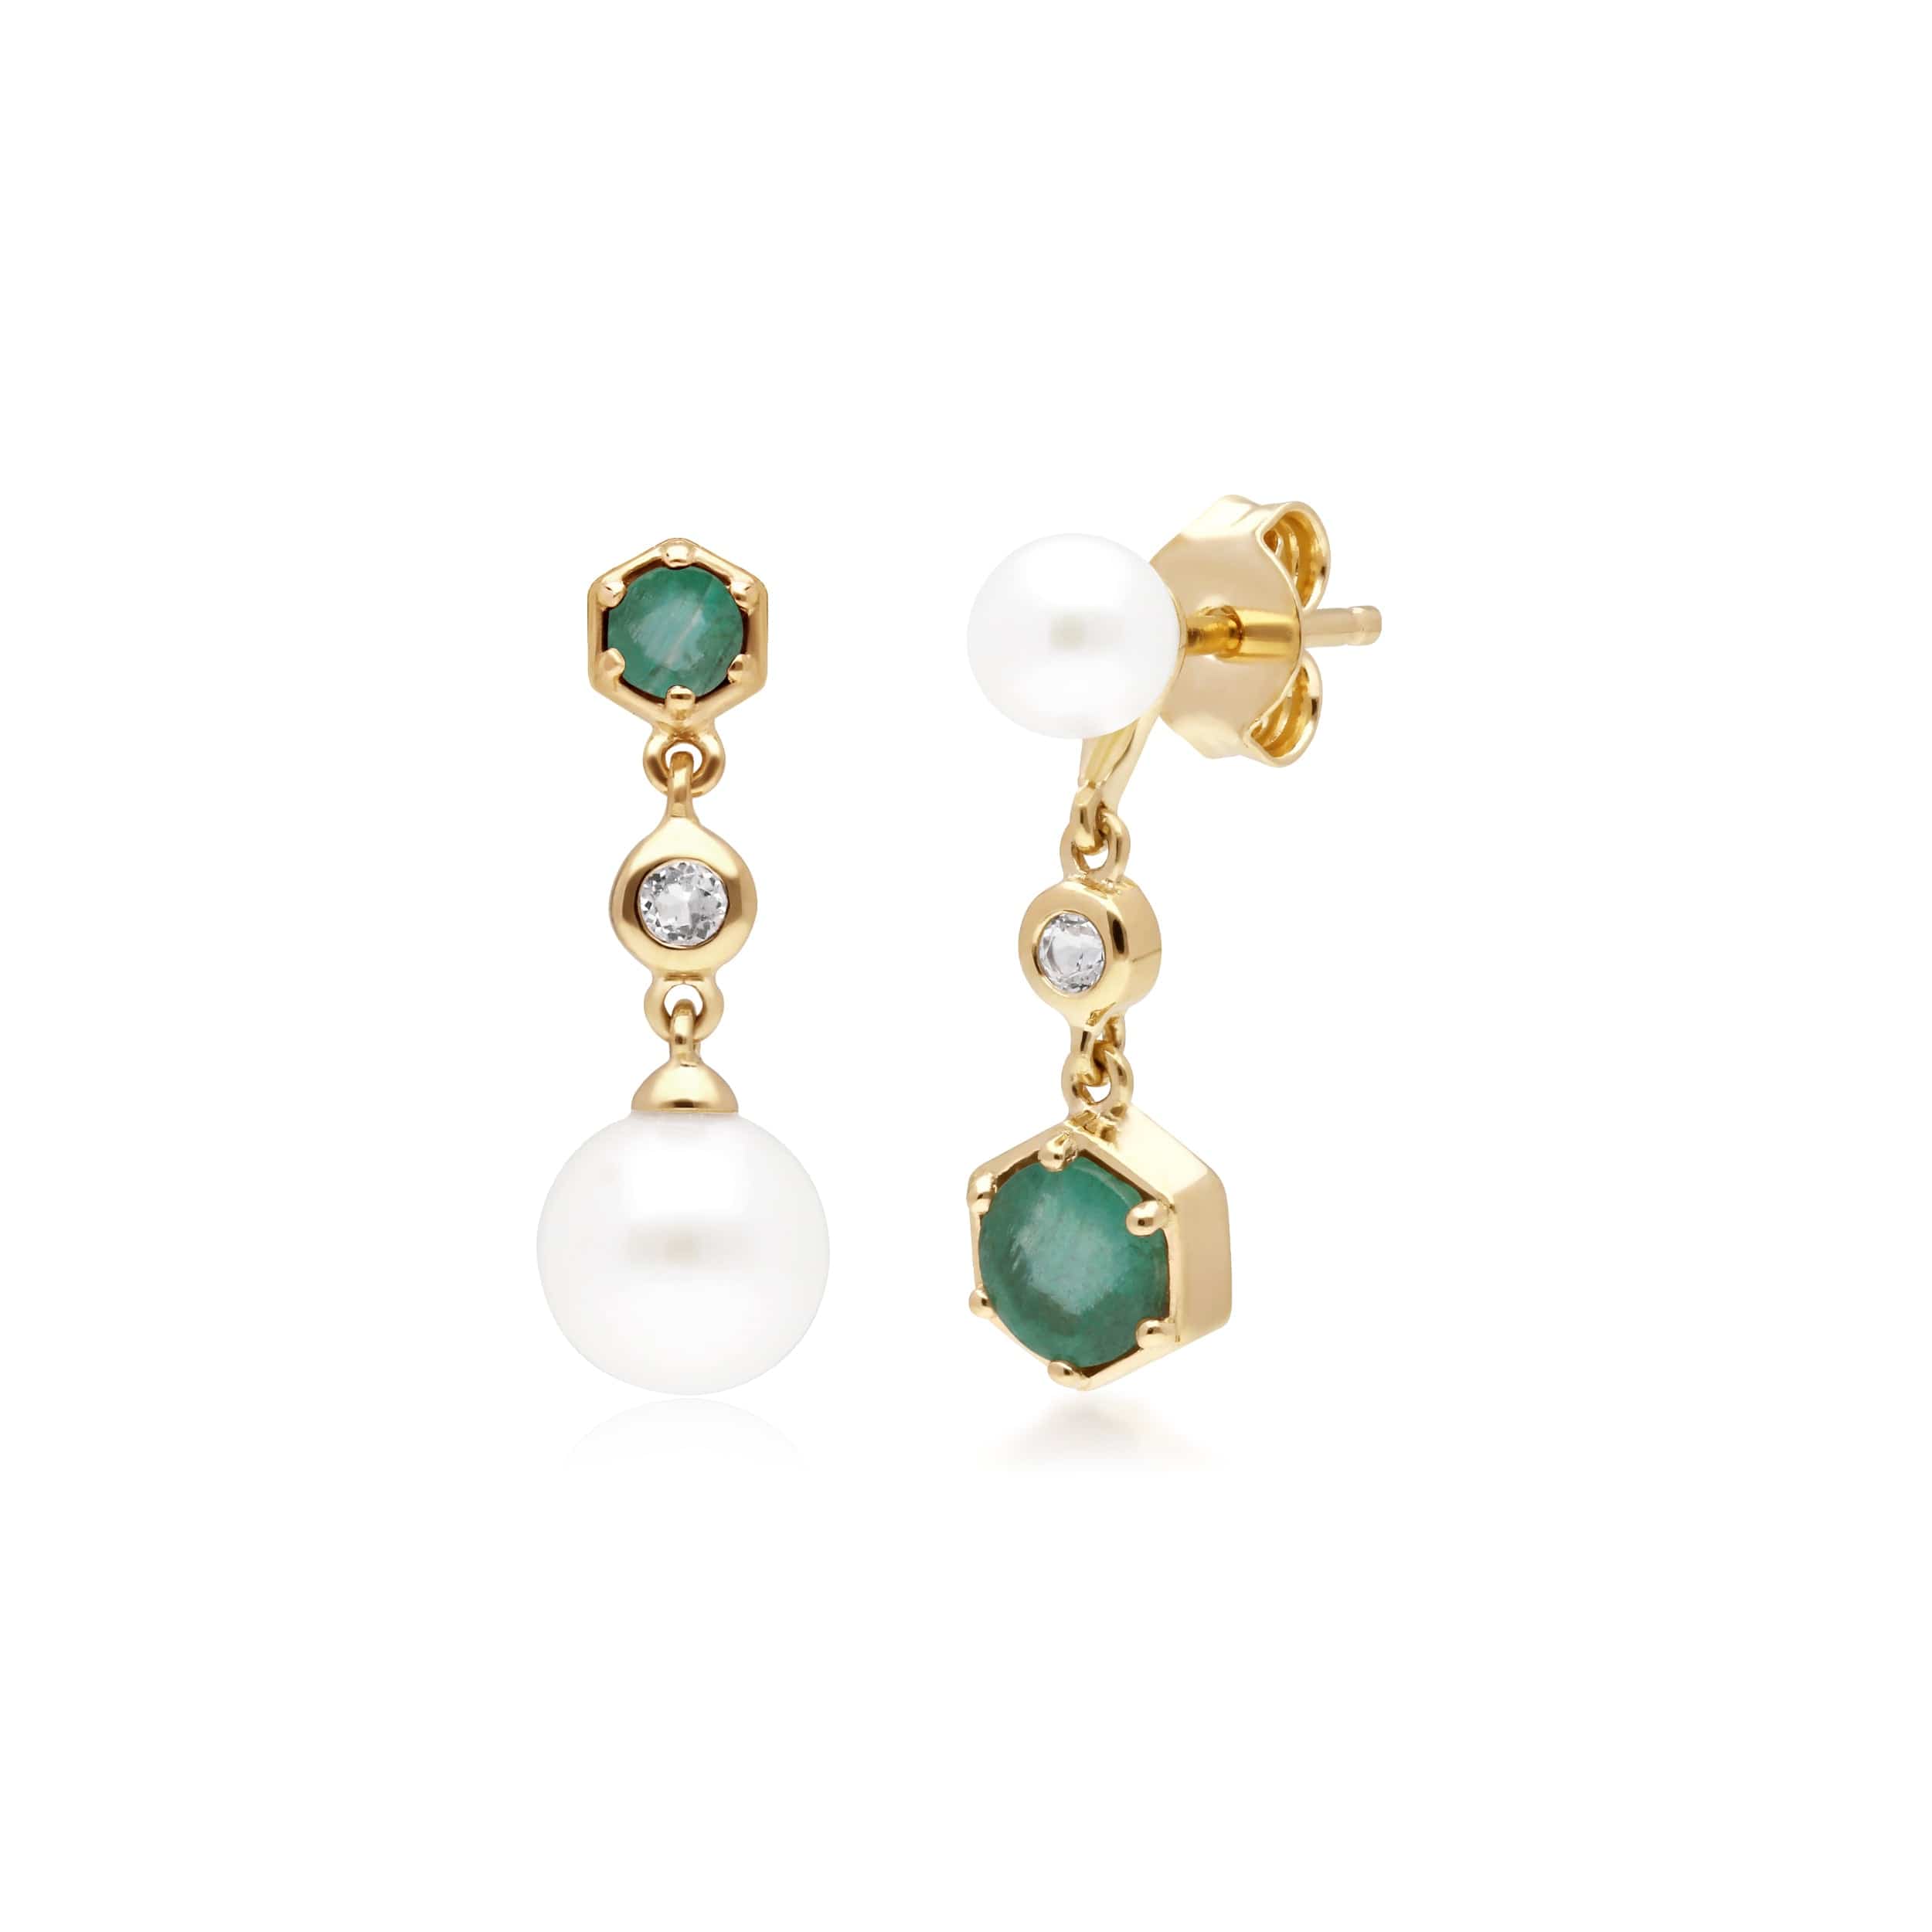 Modern Pearl, Emerald & Topaz Mismatched Drop Earrings in Gold Plated Silver